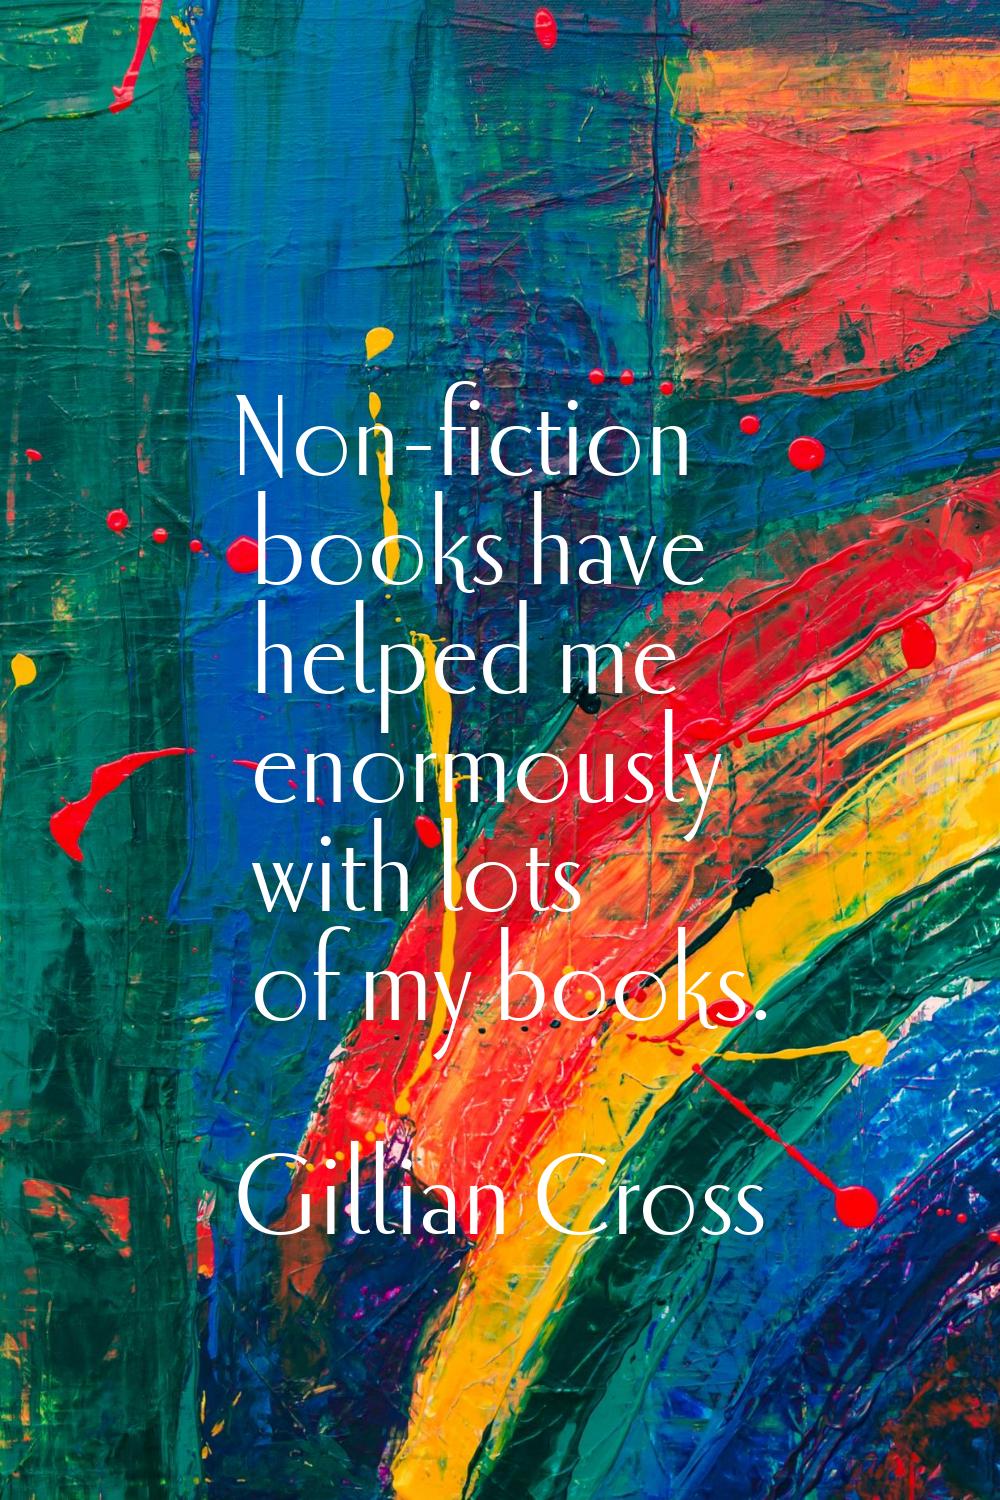 Non-fiction books have helped me enormously with lots of my books.